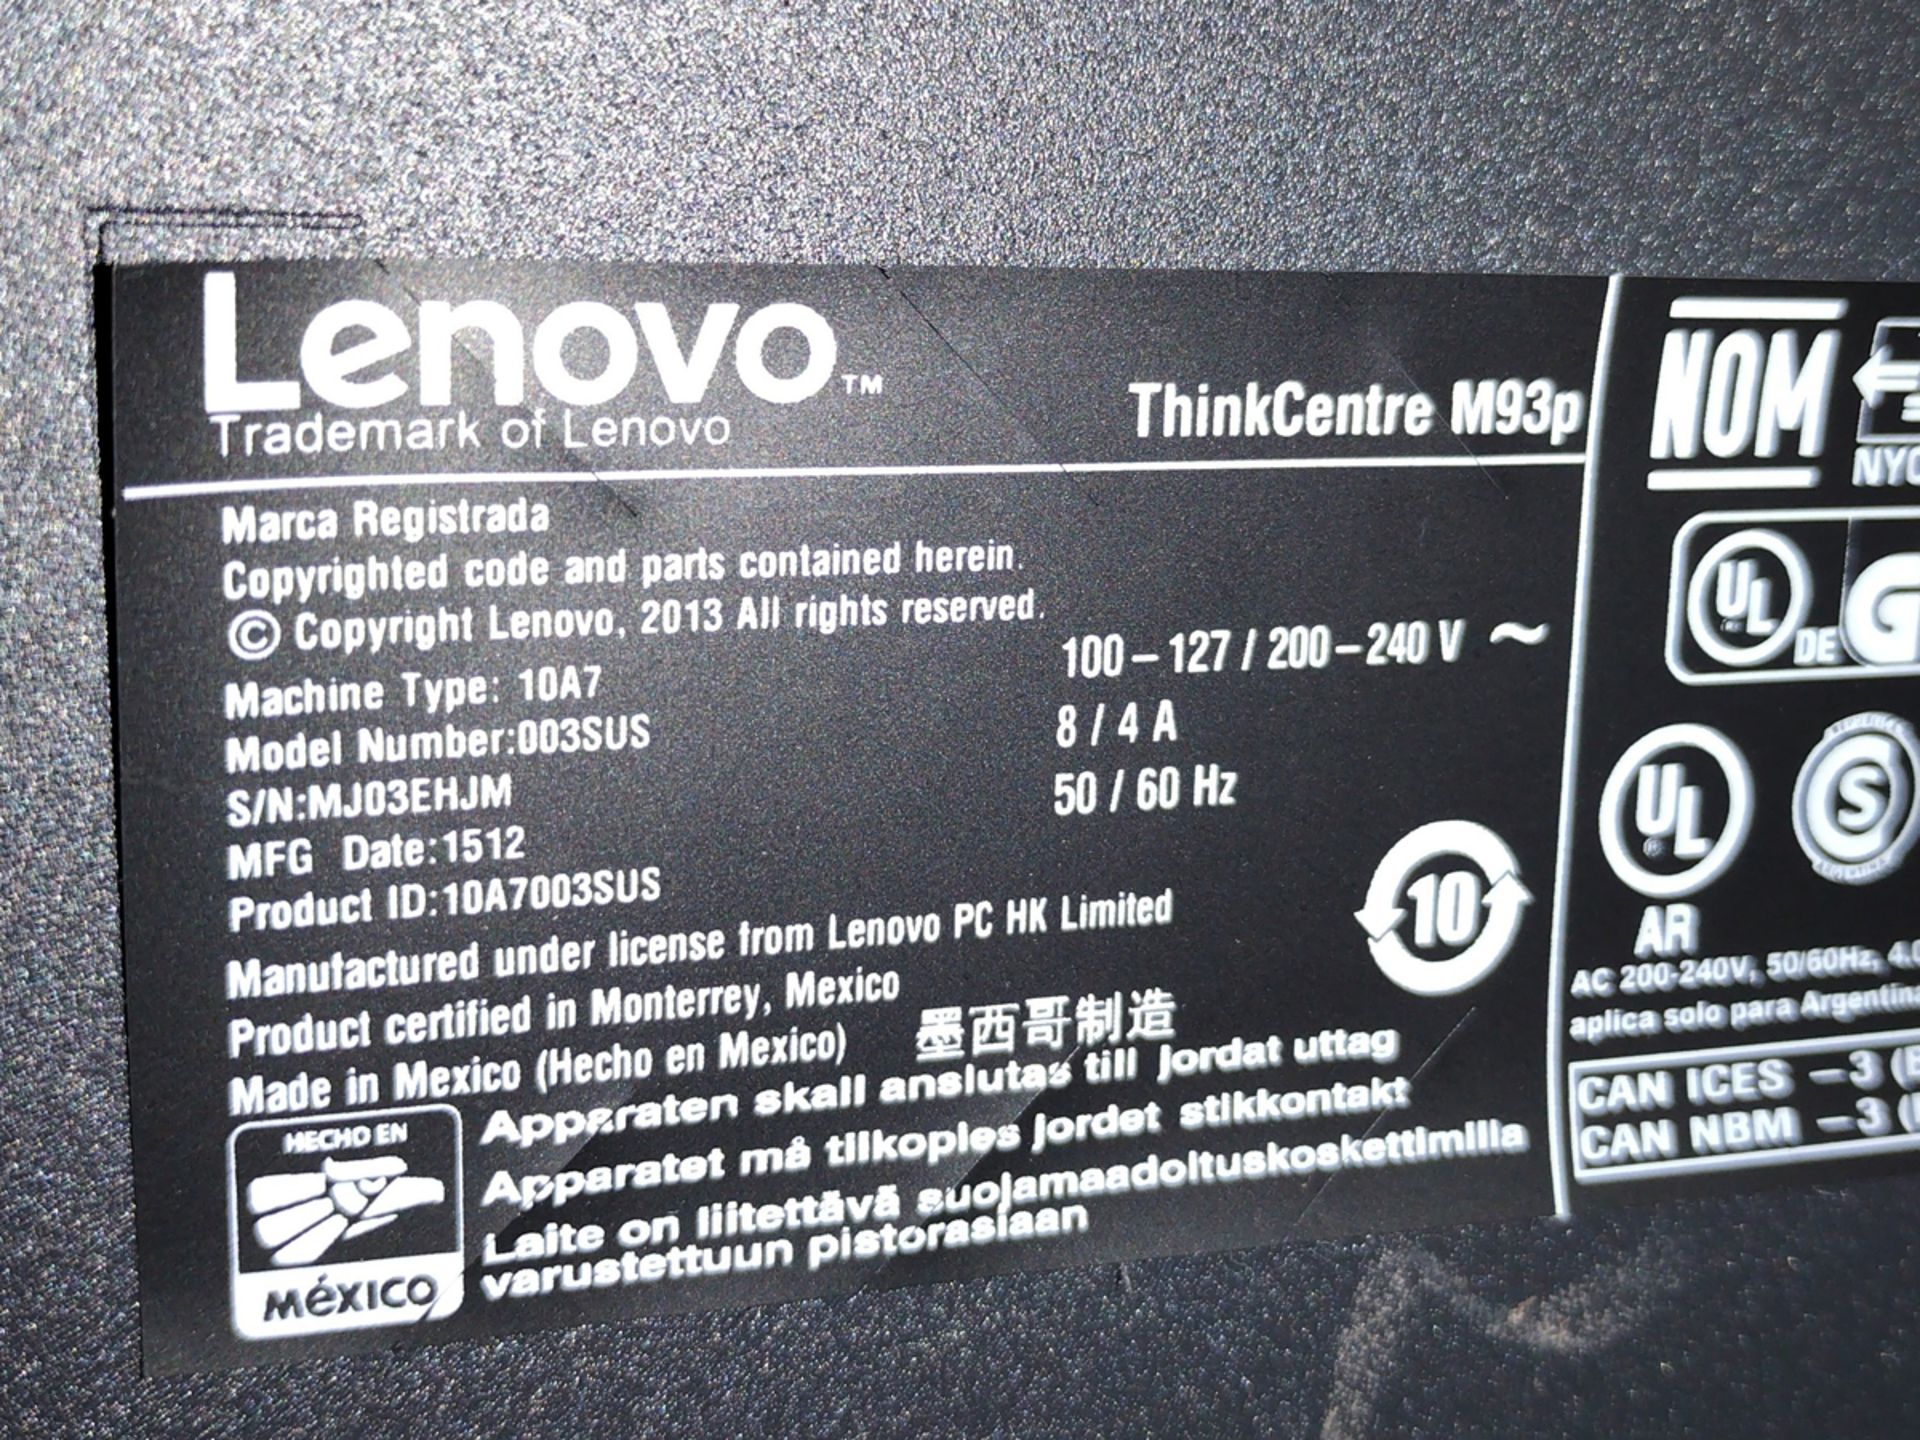 Lenovo M Series ThinkCentre i7 PC w/ Monitor and Keyboard - Image 2 of 2